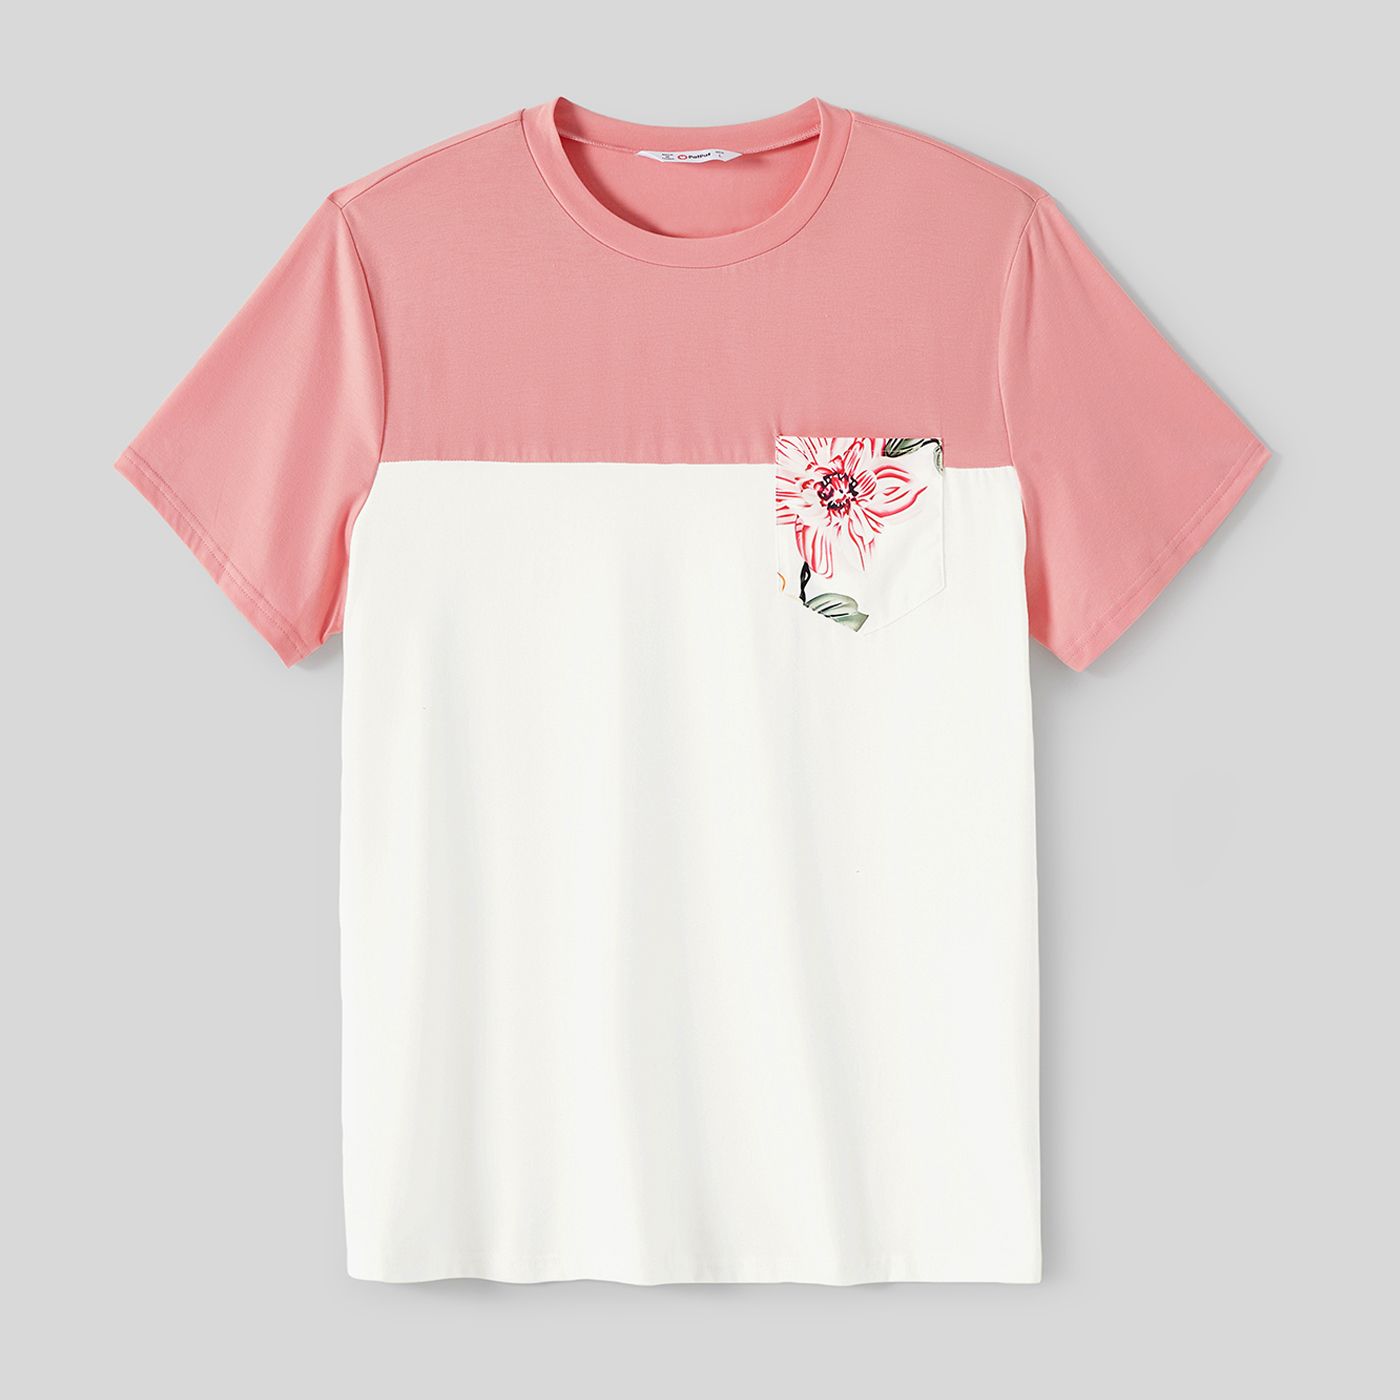 Family Matching Allover Floral Print Notched Neck Belted Dresses and Short-sleeve Colorblock T-shirt